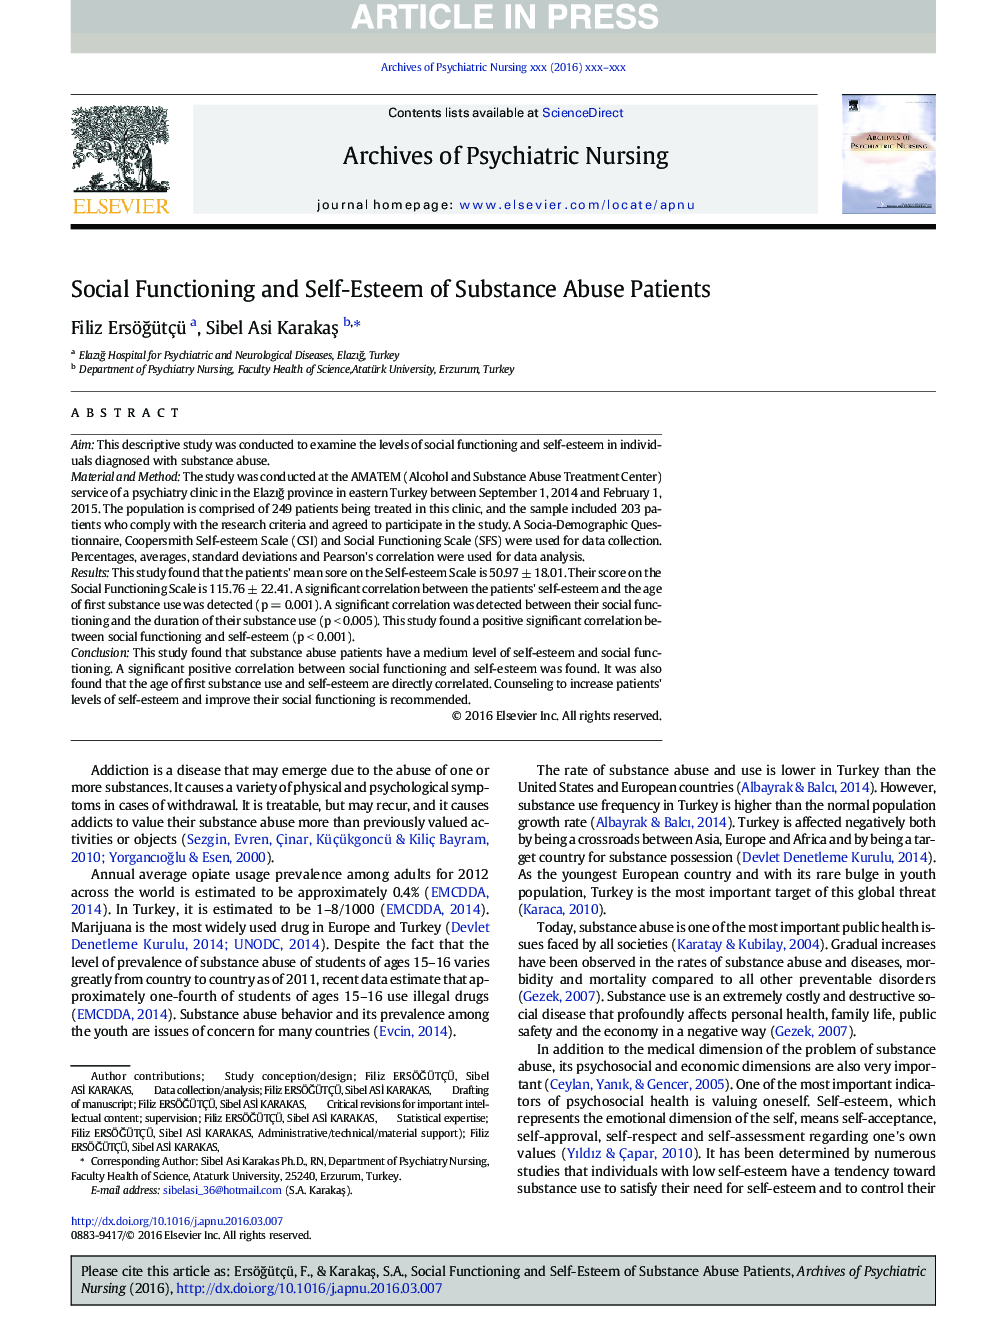 Social Functioning and Self-Esteem of Substance Abuse Patients